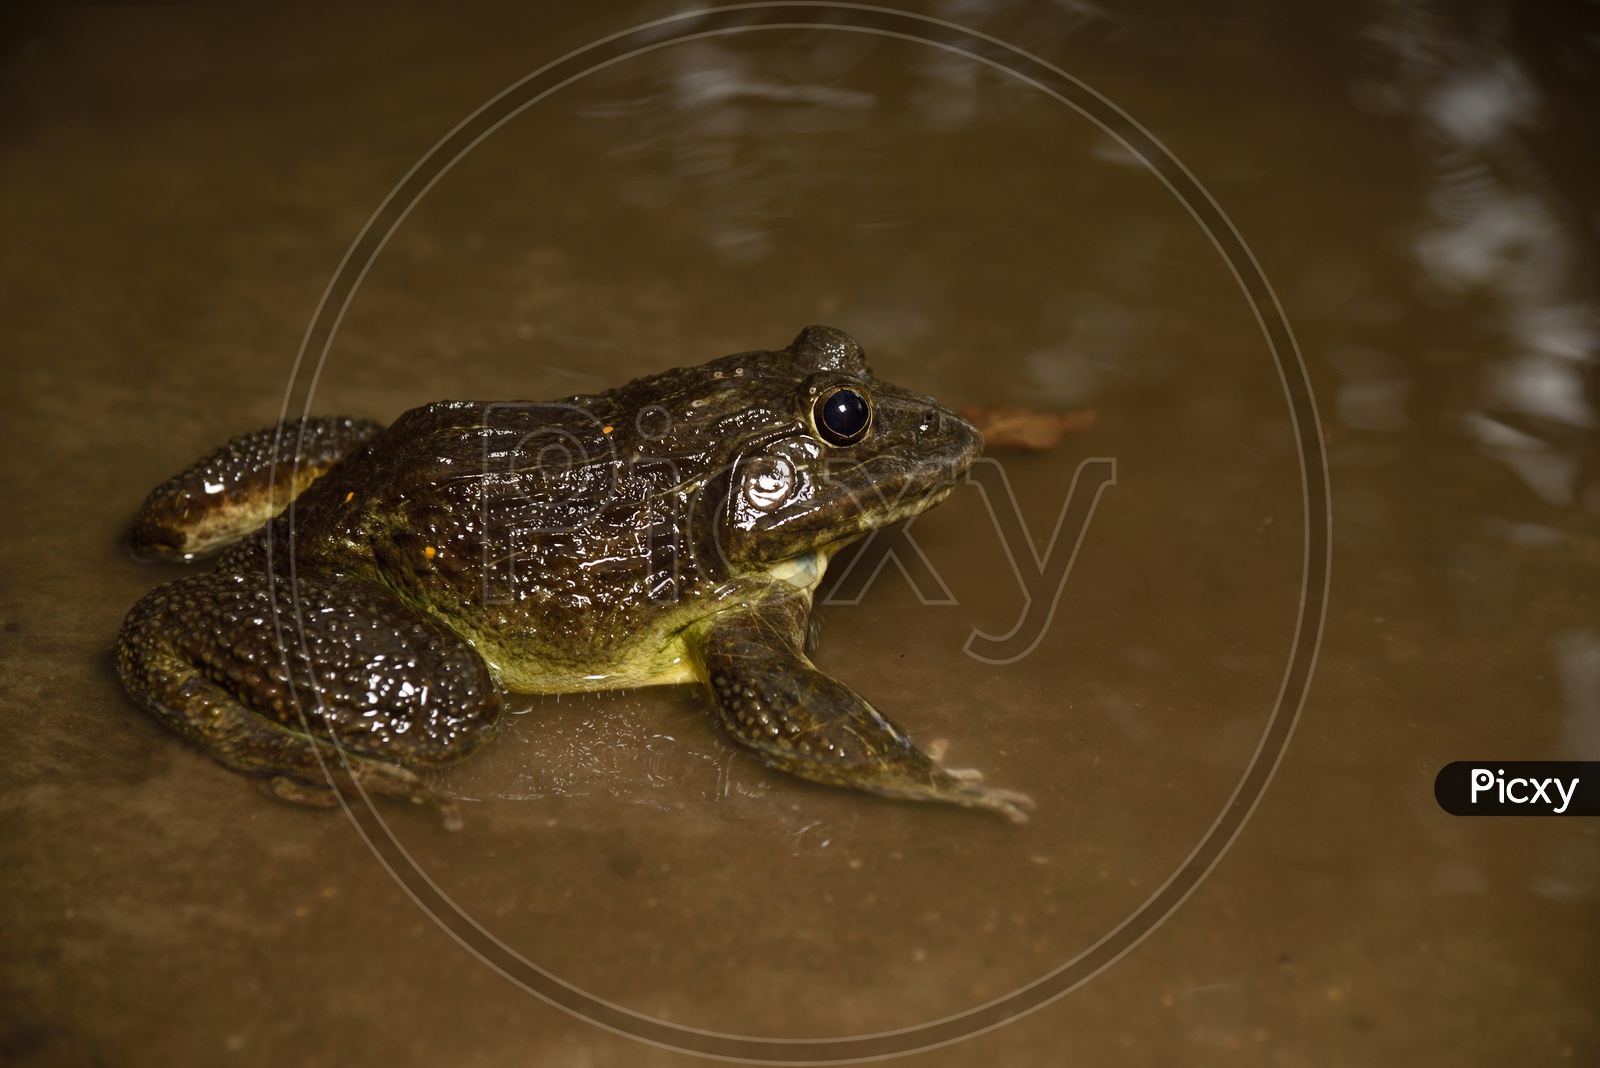 True Toad Frog Or Indian Pond Frog  in water  Closeup